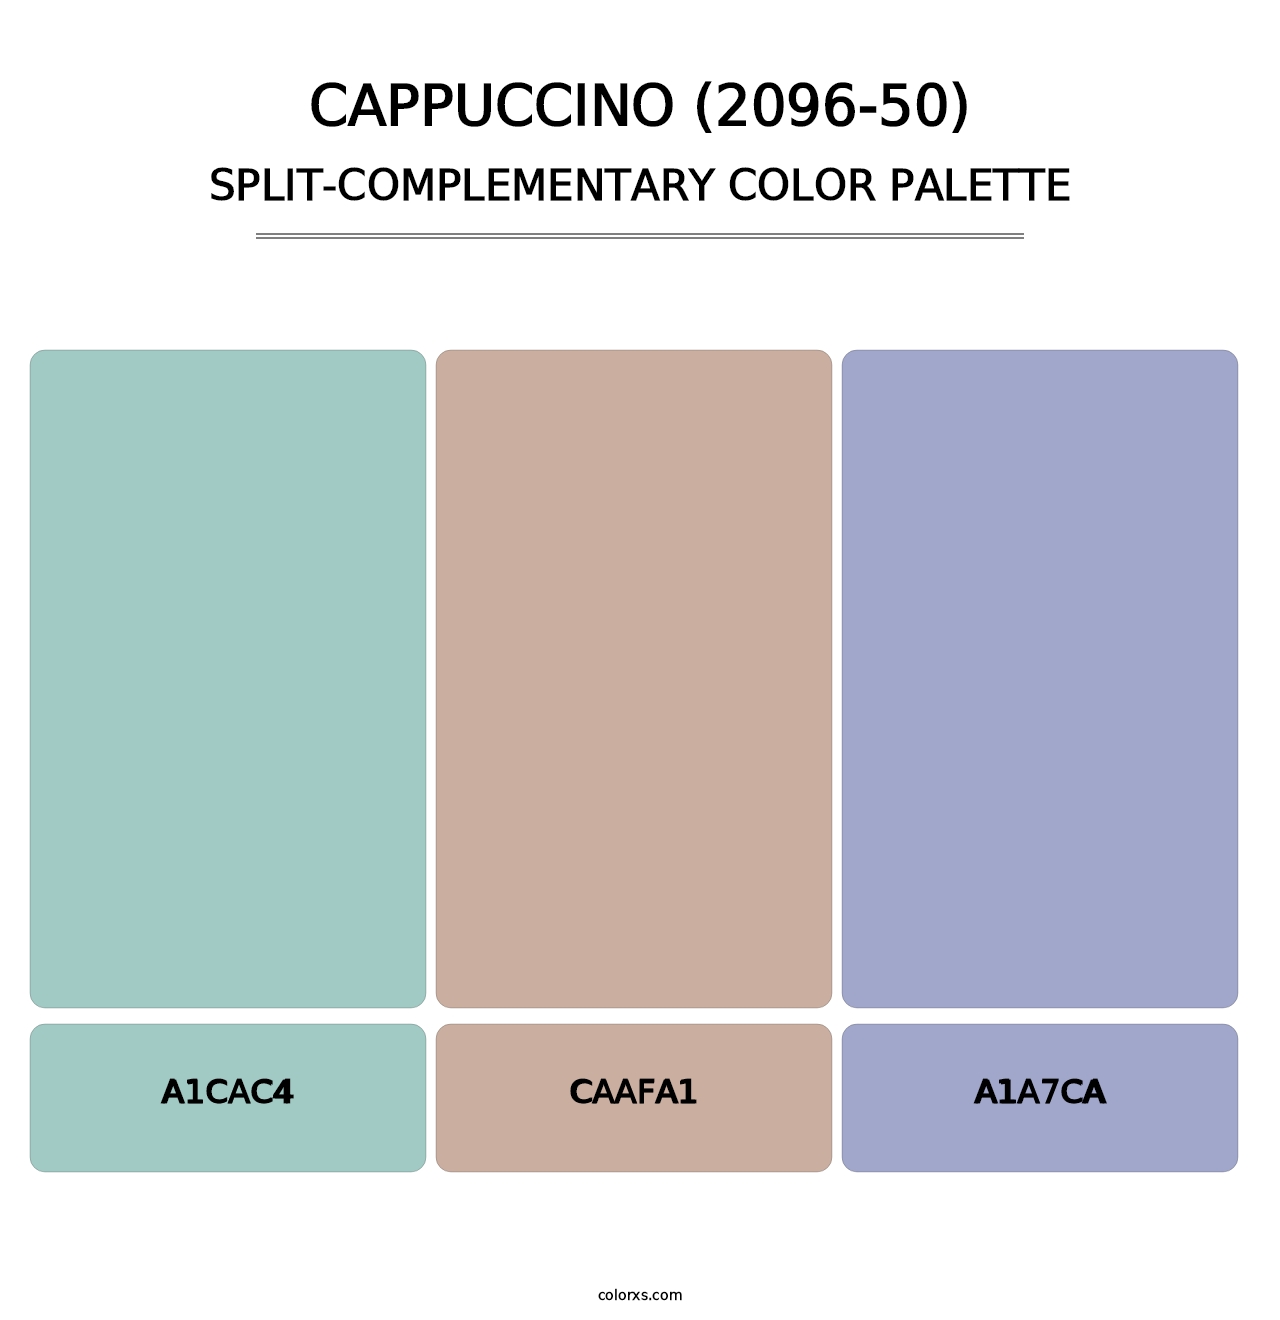 Cappuccino (2096-50) - Split-Complementary Color Palette